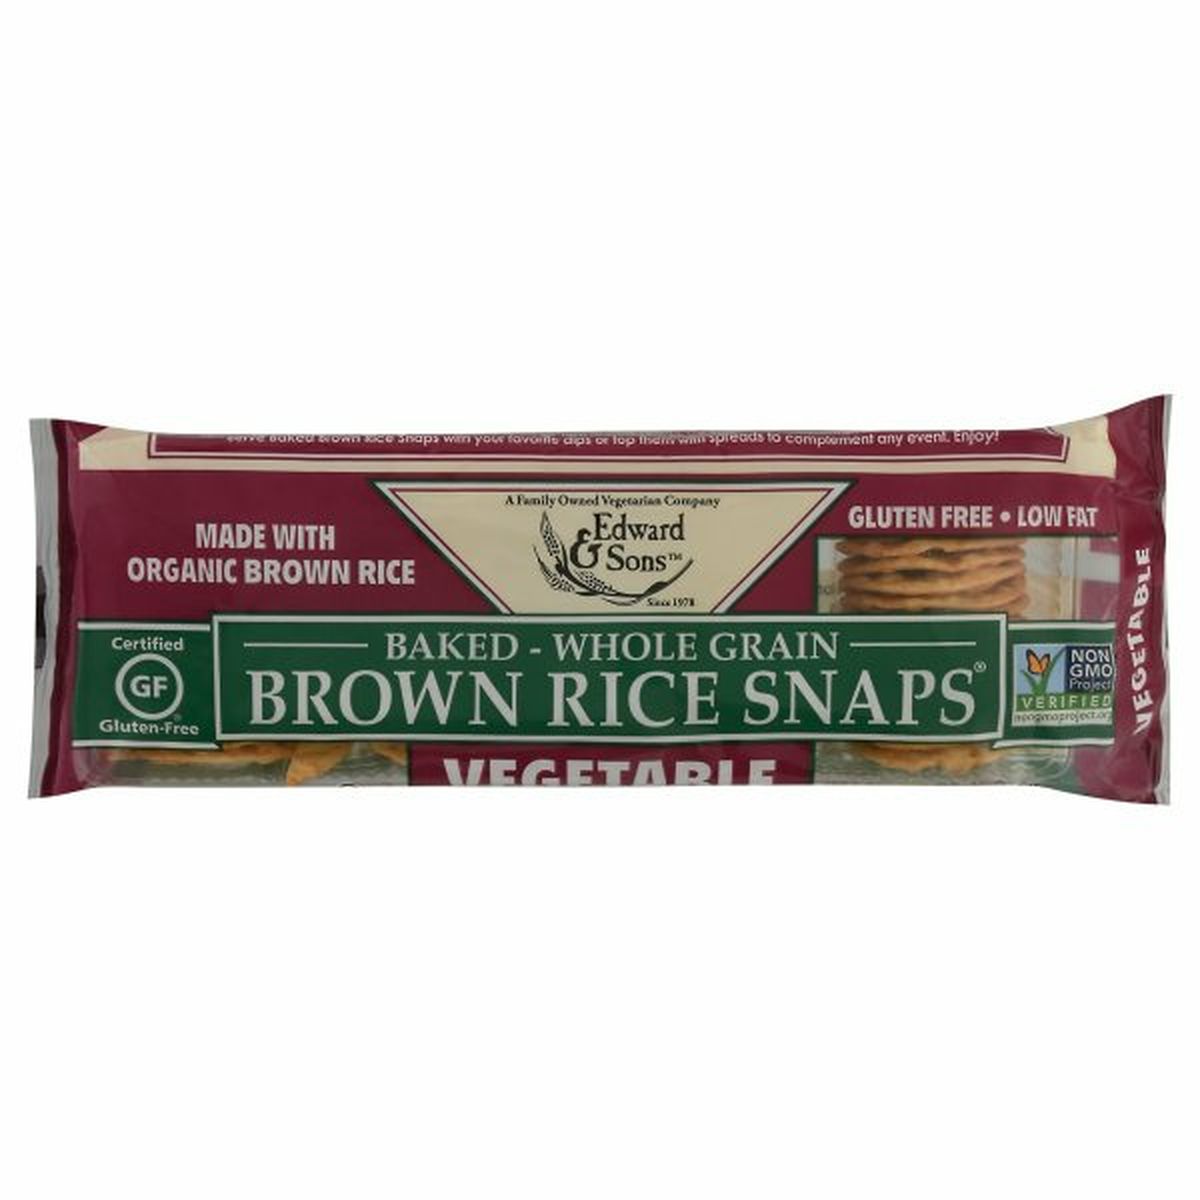 Calories in Edward & Sons Brown Rice Snaps, Vegetable